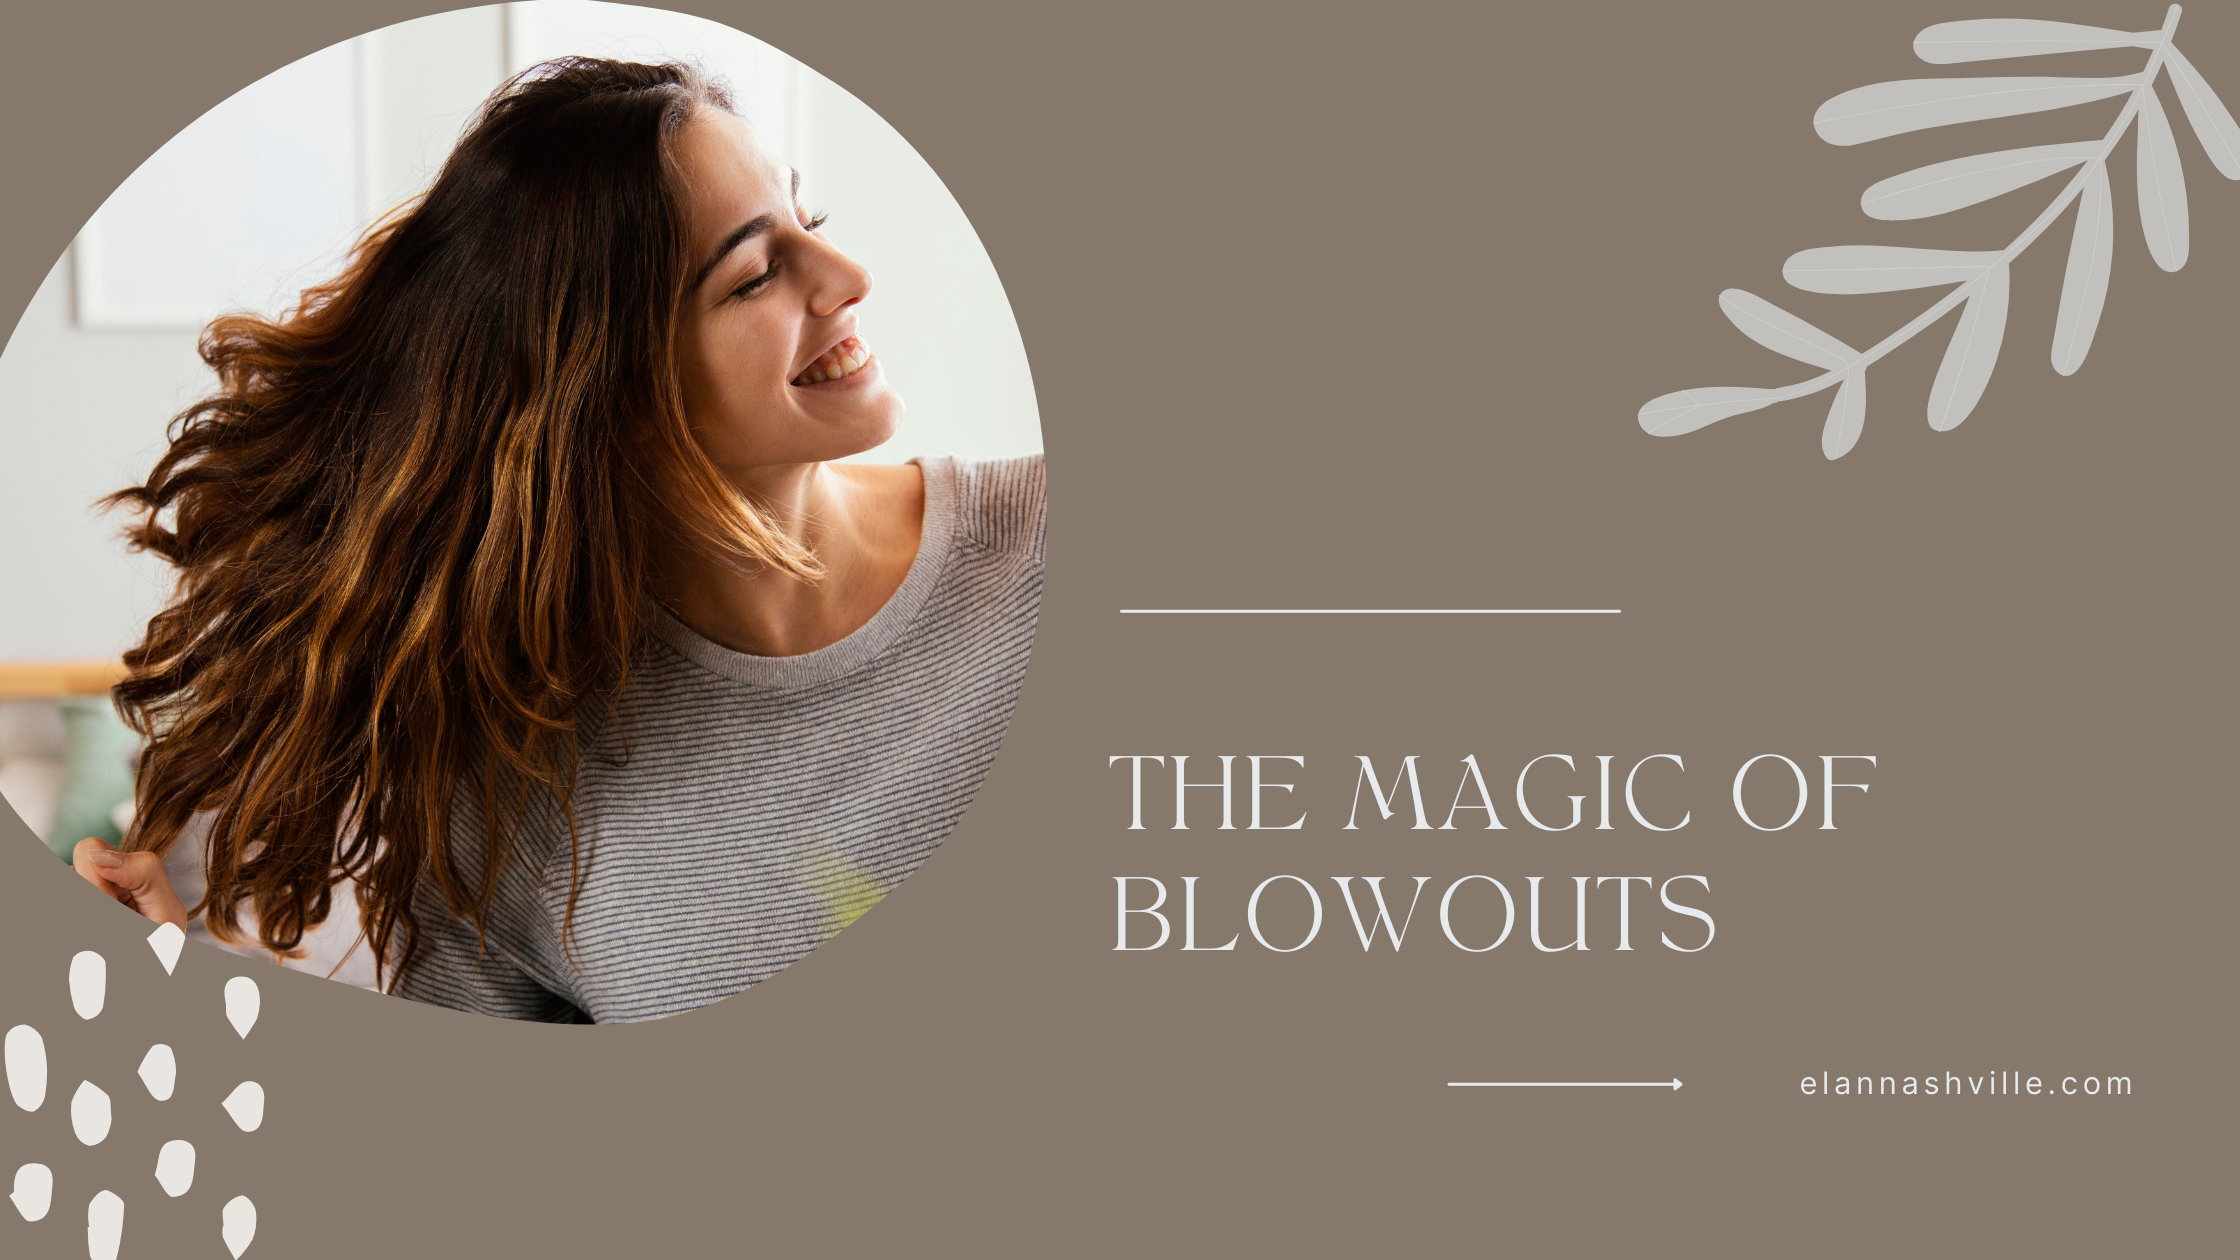 The Magic of Blowouts